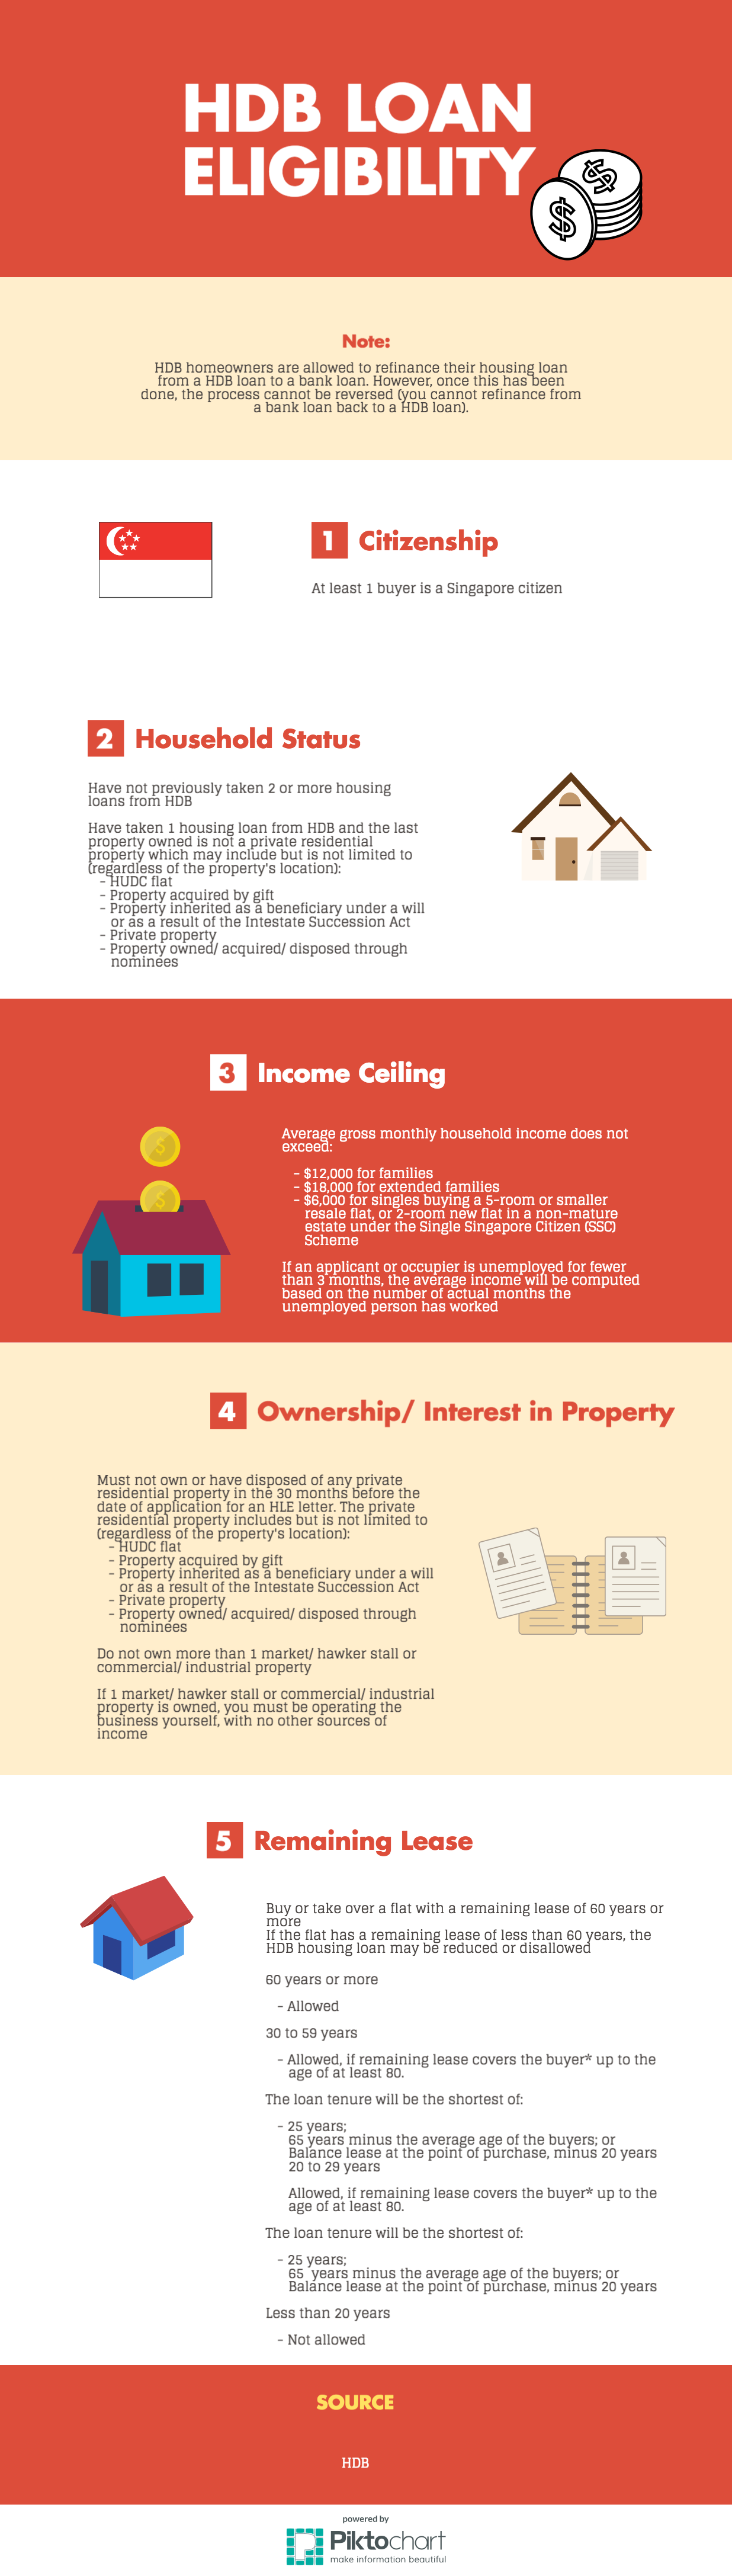 HDB loan eligibility infographic